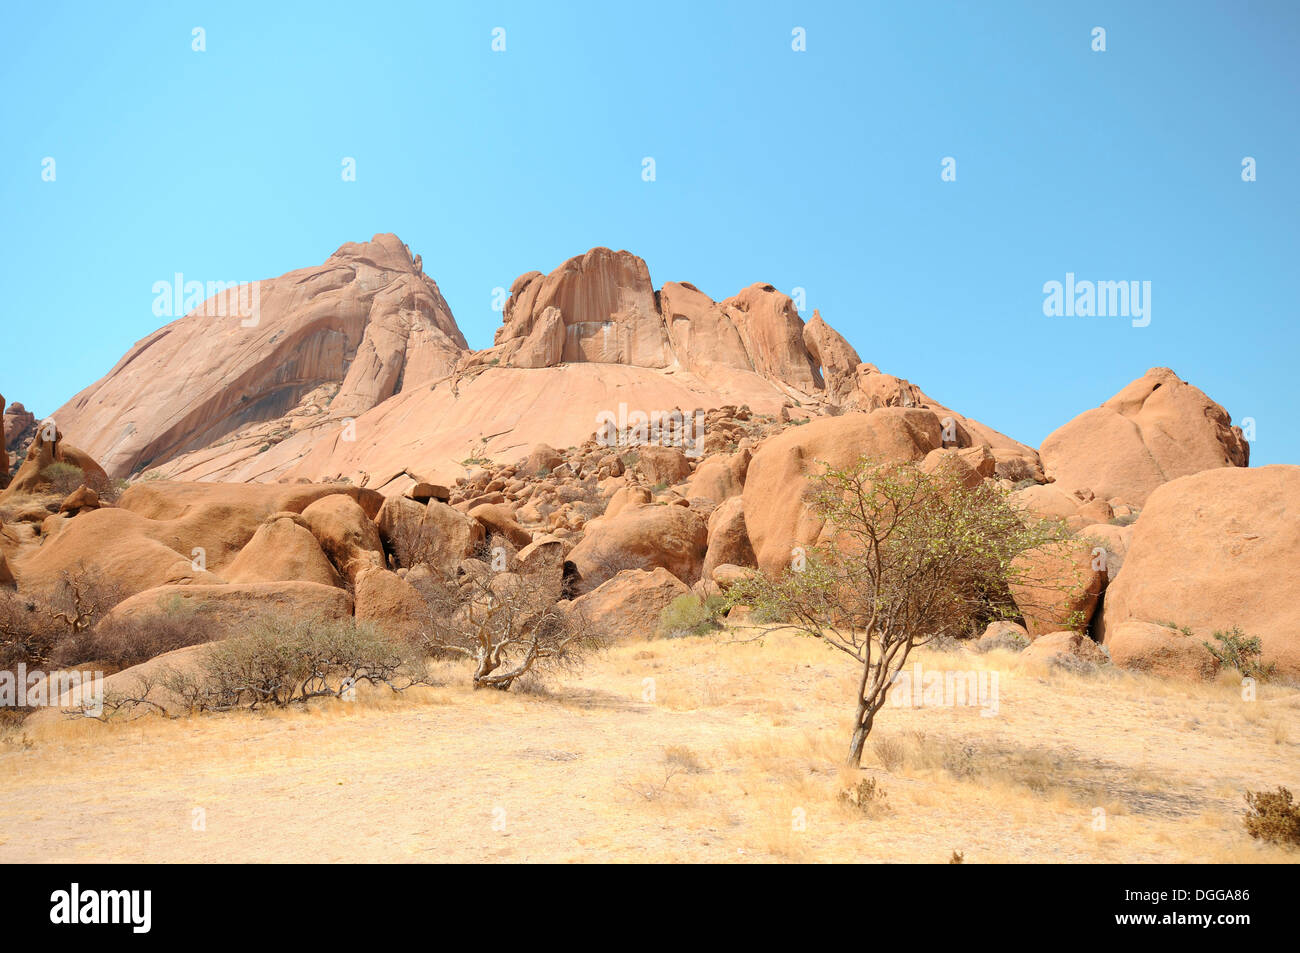 Savannah landscape with granite rocks and Spitzkoppe Mountain, Große Spitzkuppe Nature Reserve, Namibia Stock Photo